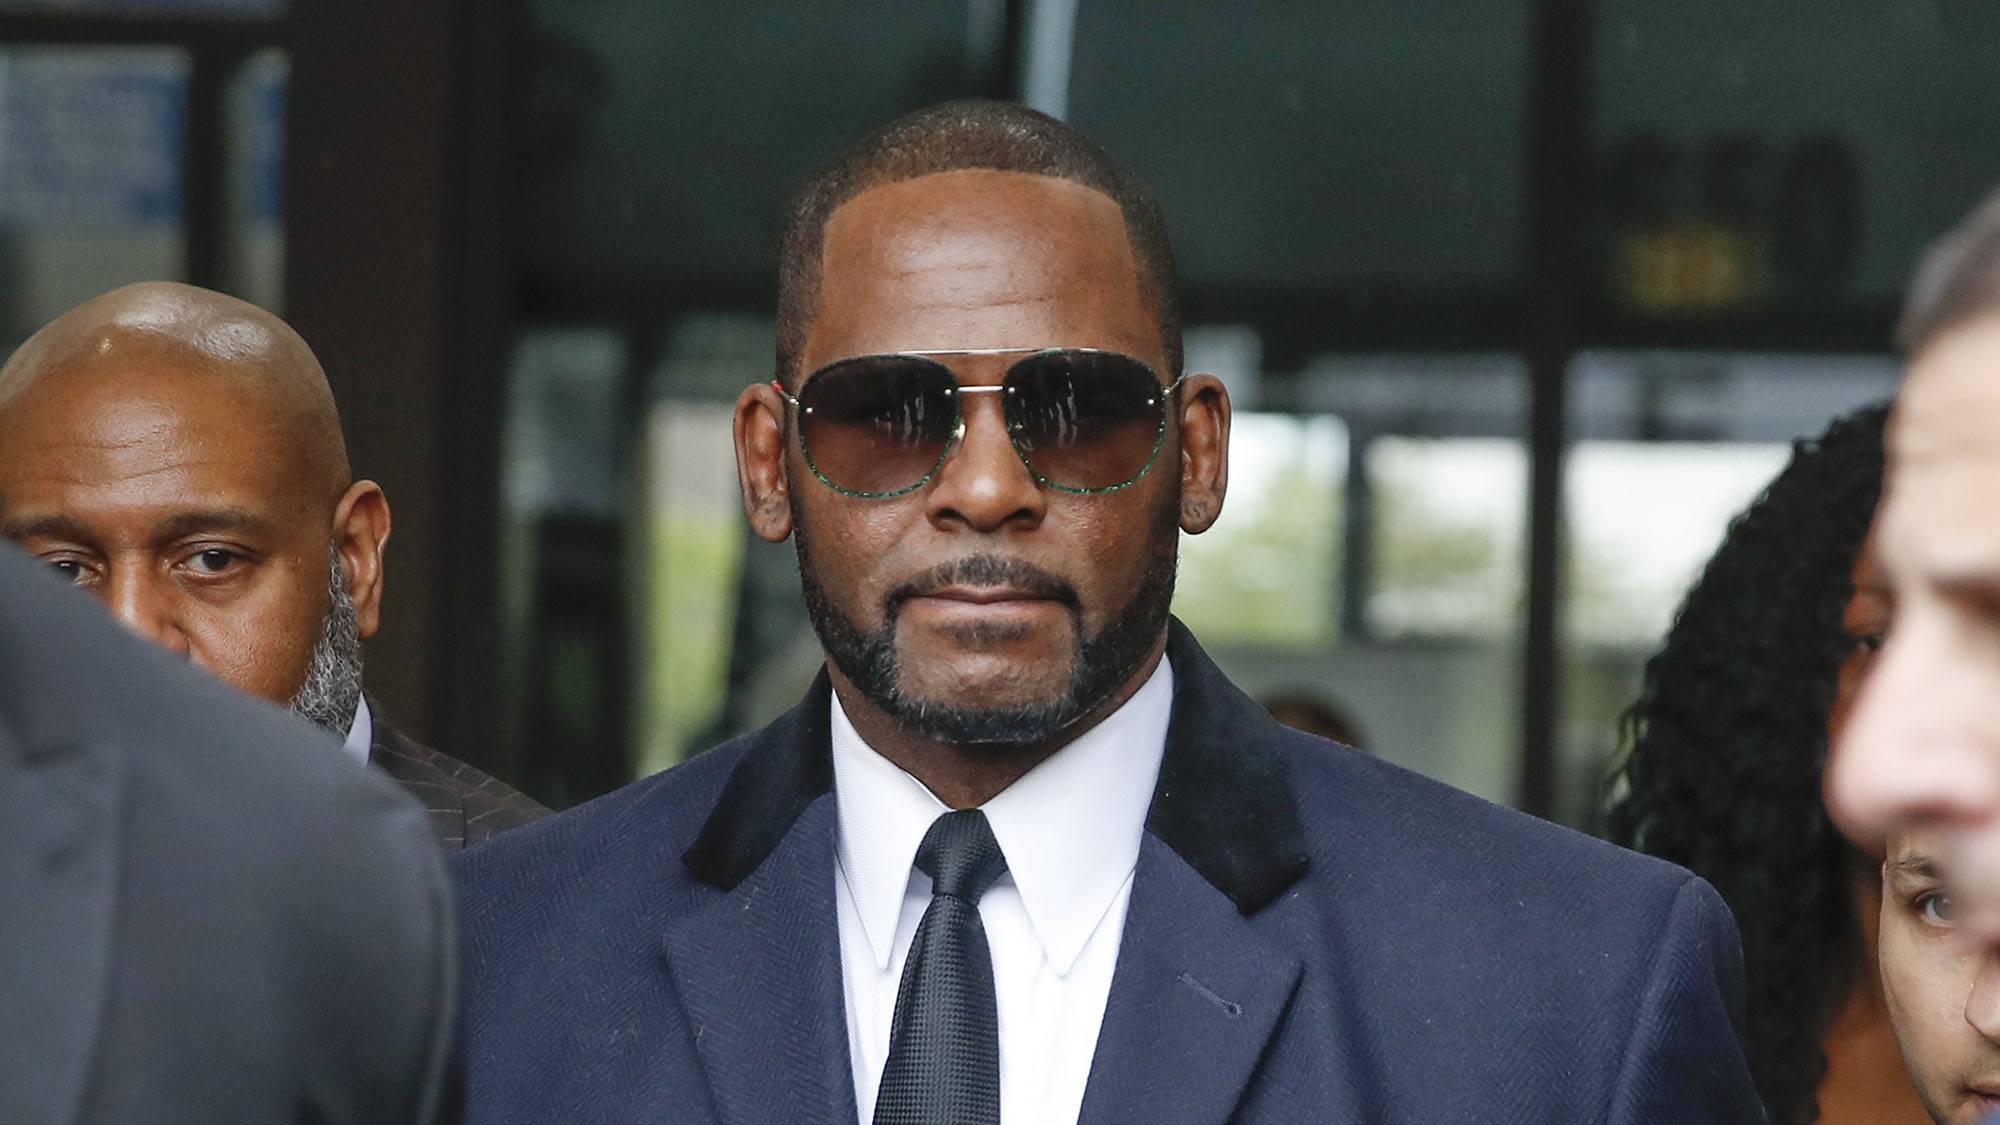 Xxx Videos16 - Girl In Sex Videos Allegedly Recorded By R. Kelly Expected To Testify |  News | BET